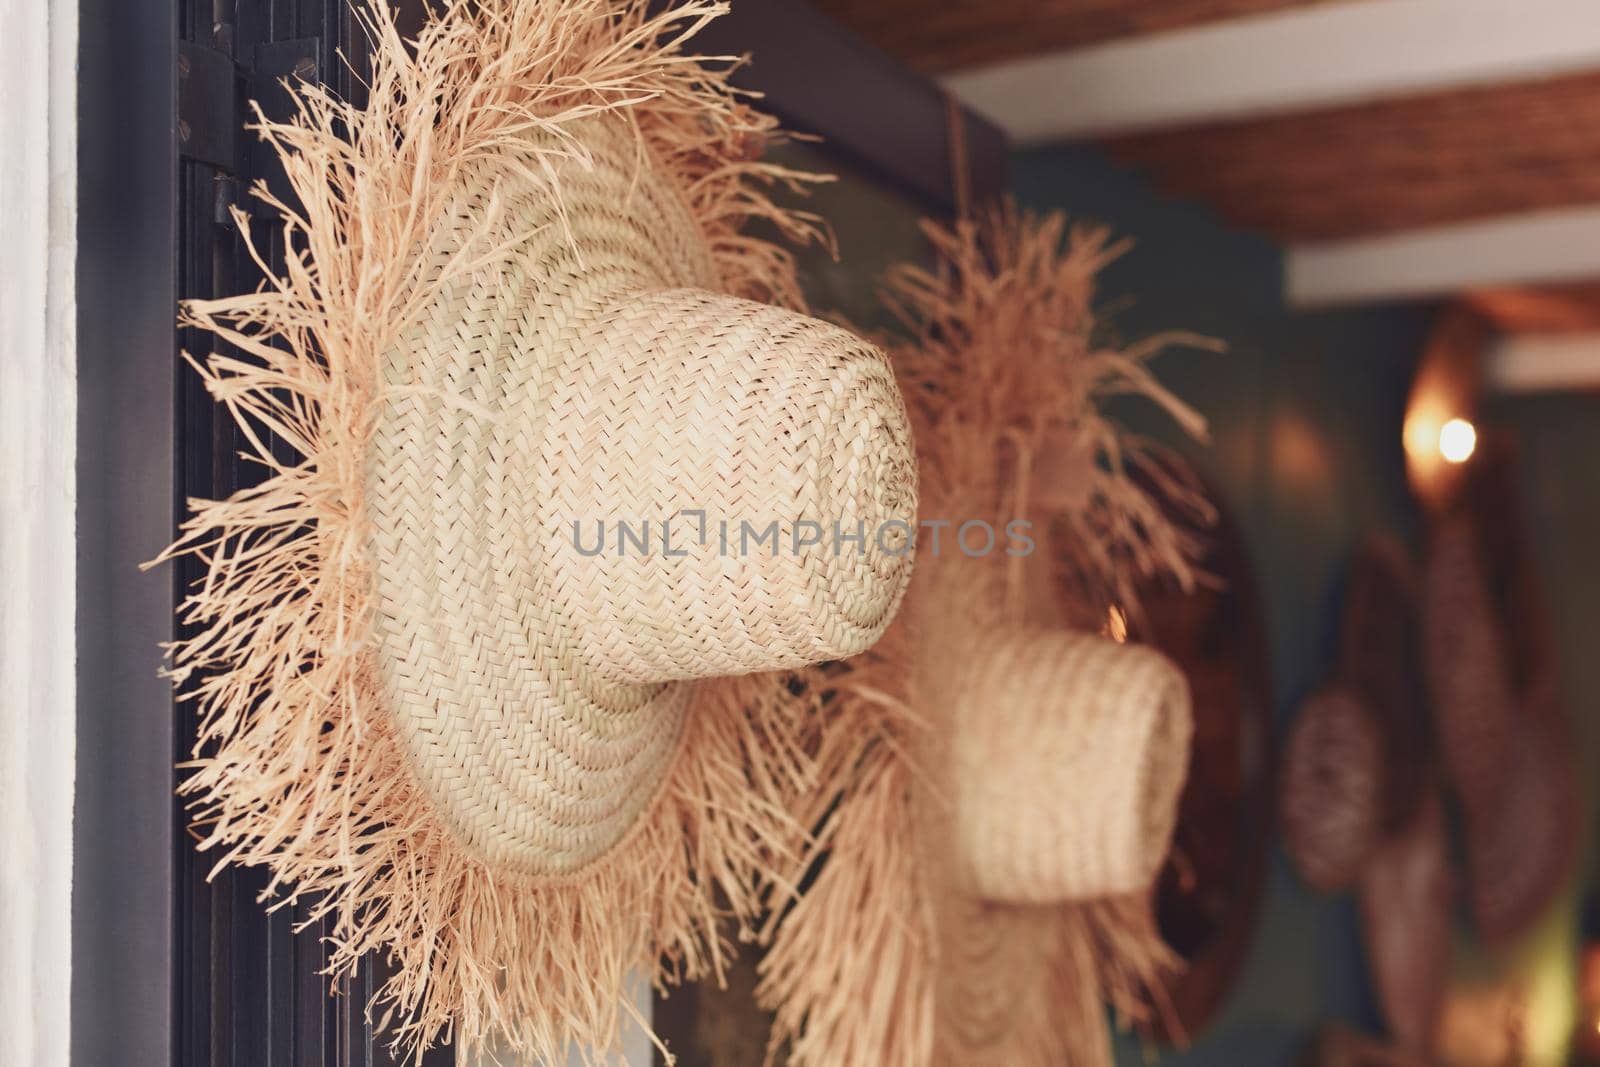 Handmade straw hats hanging in the store by Godi